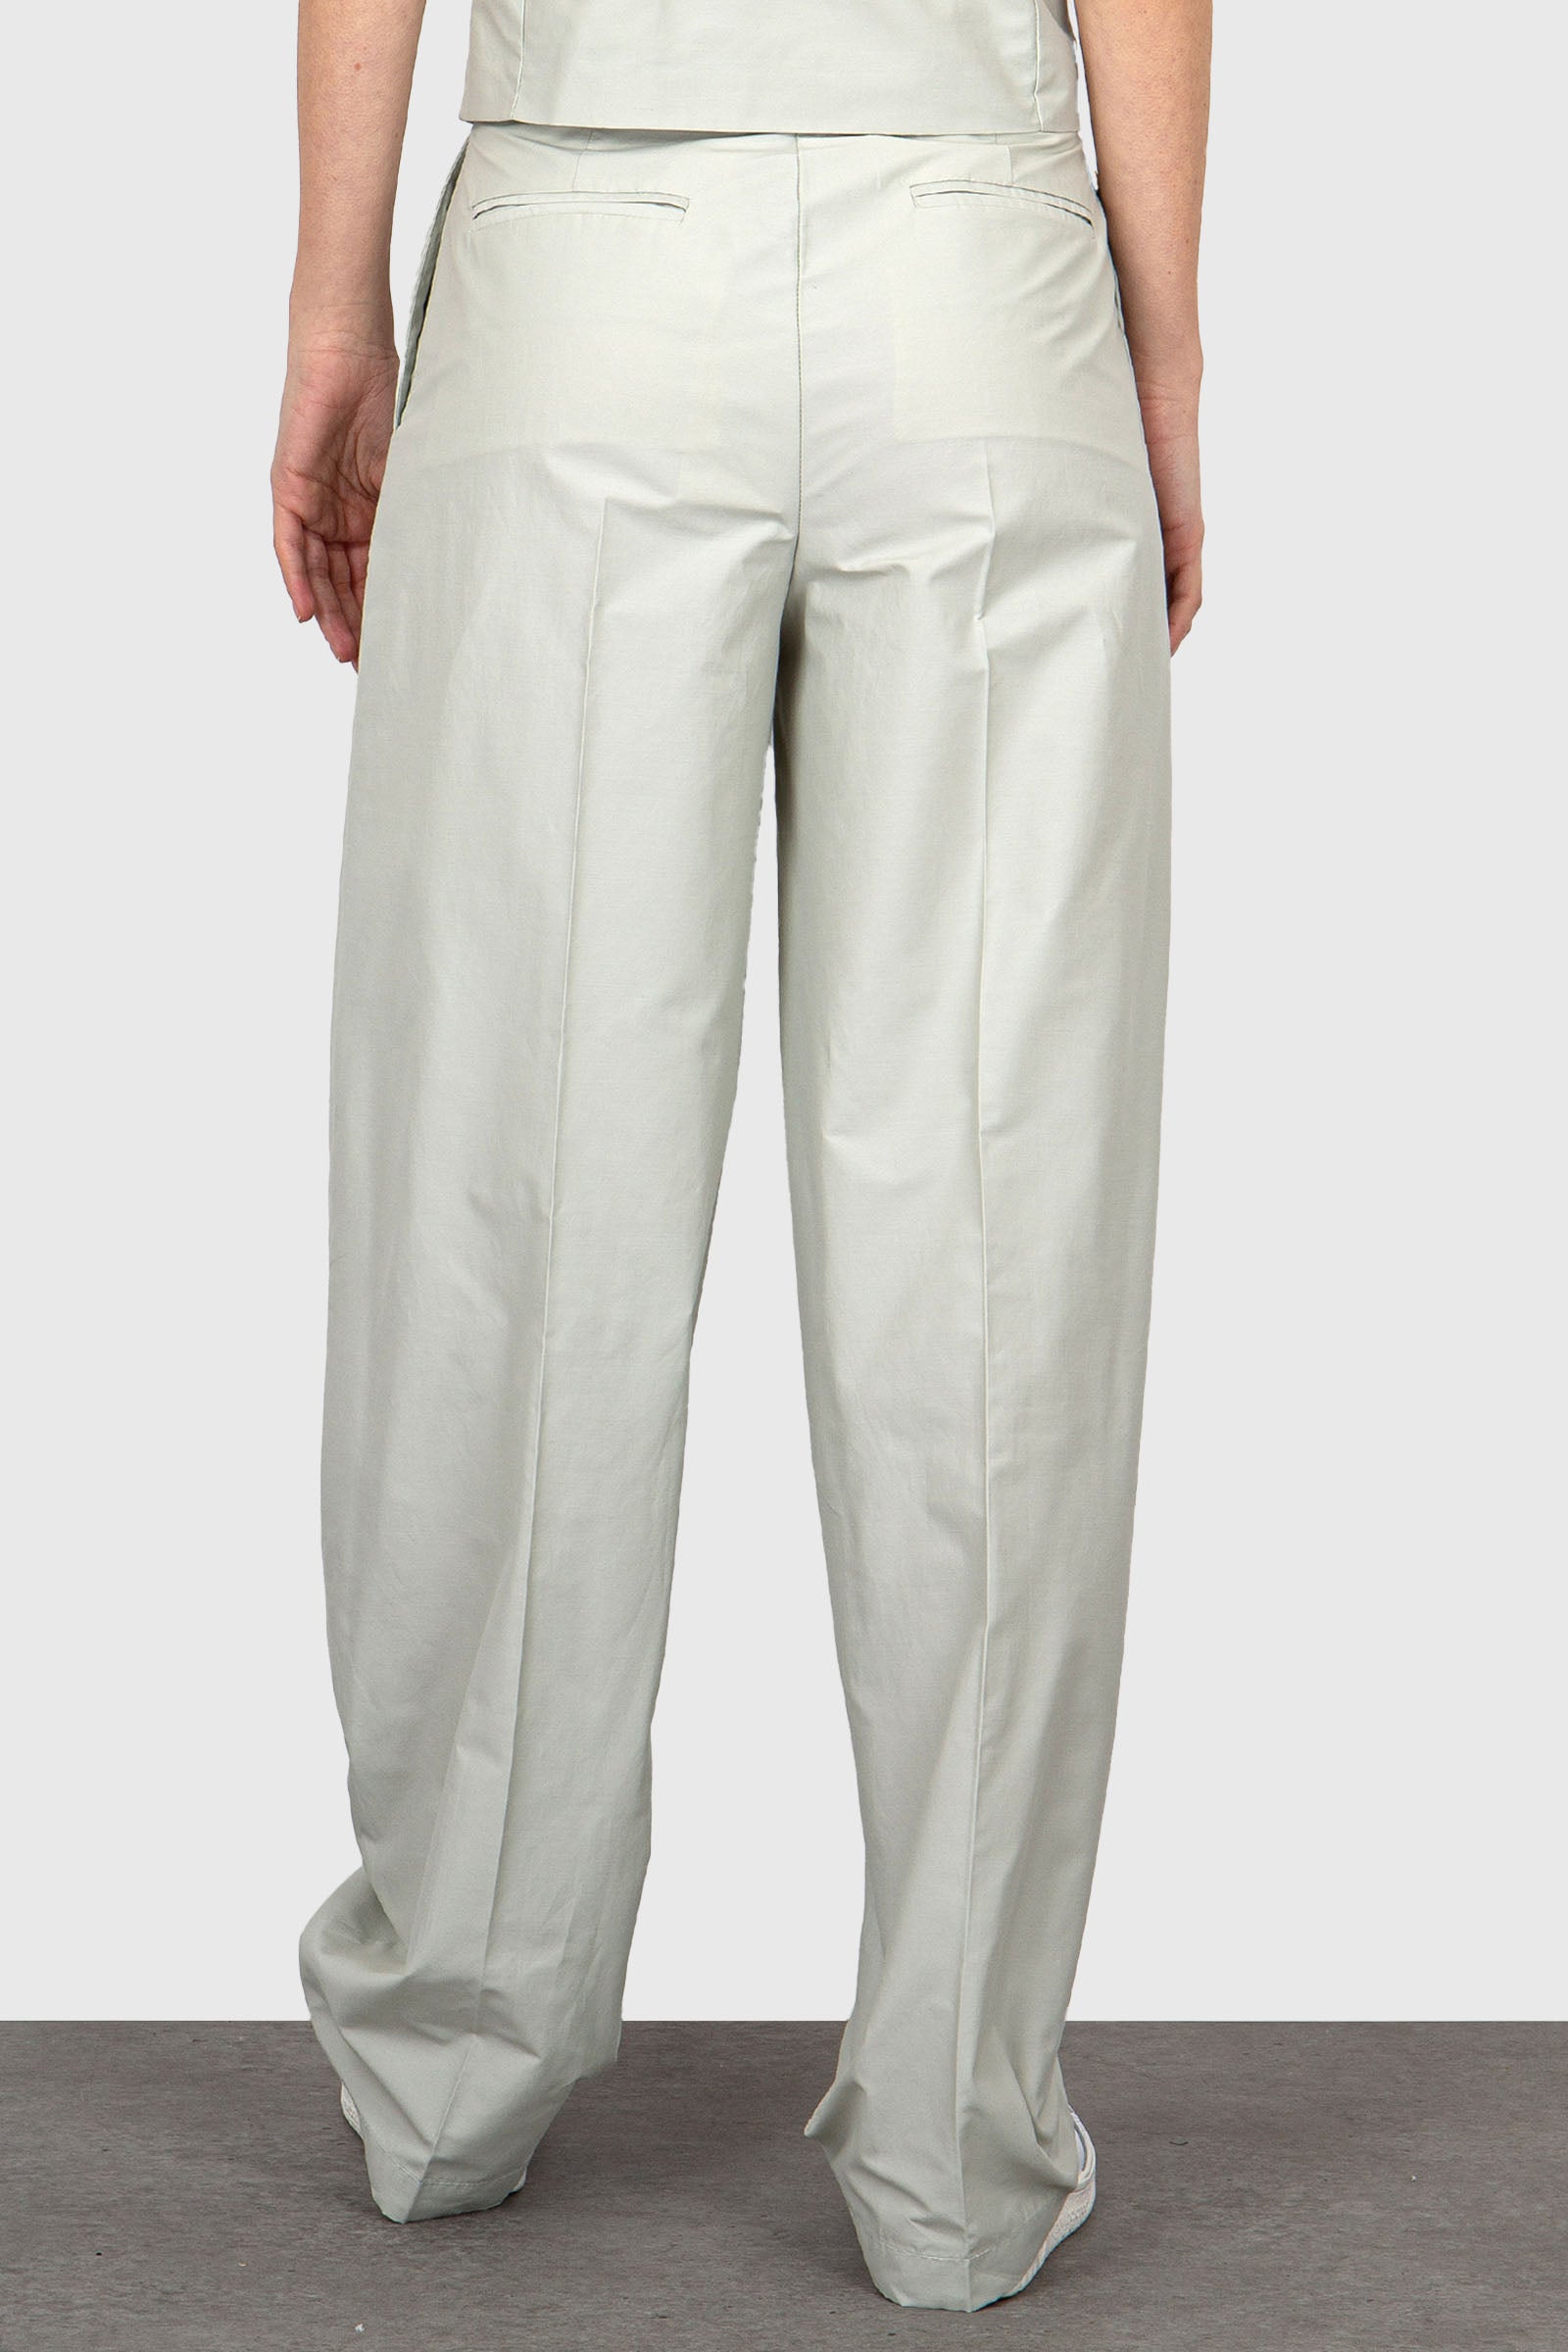 Grifoni Banana Trousers in Ice Cotton - 5